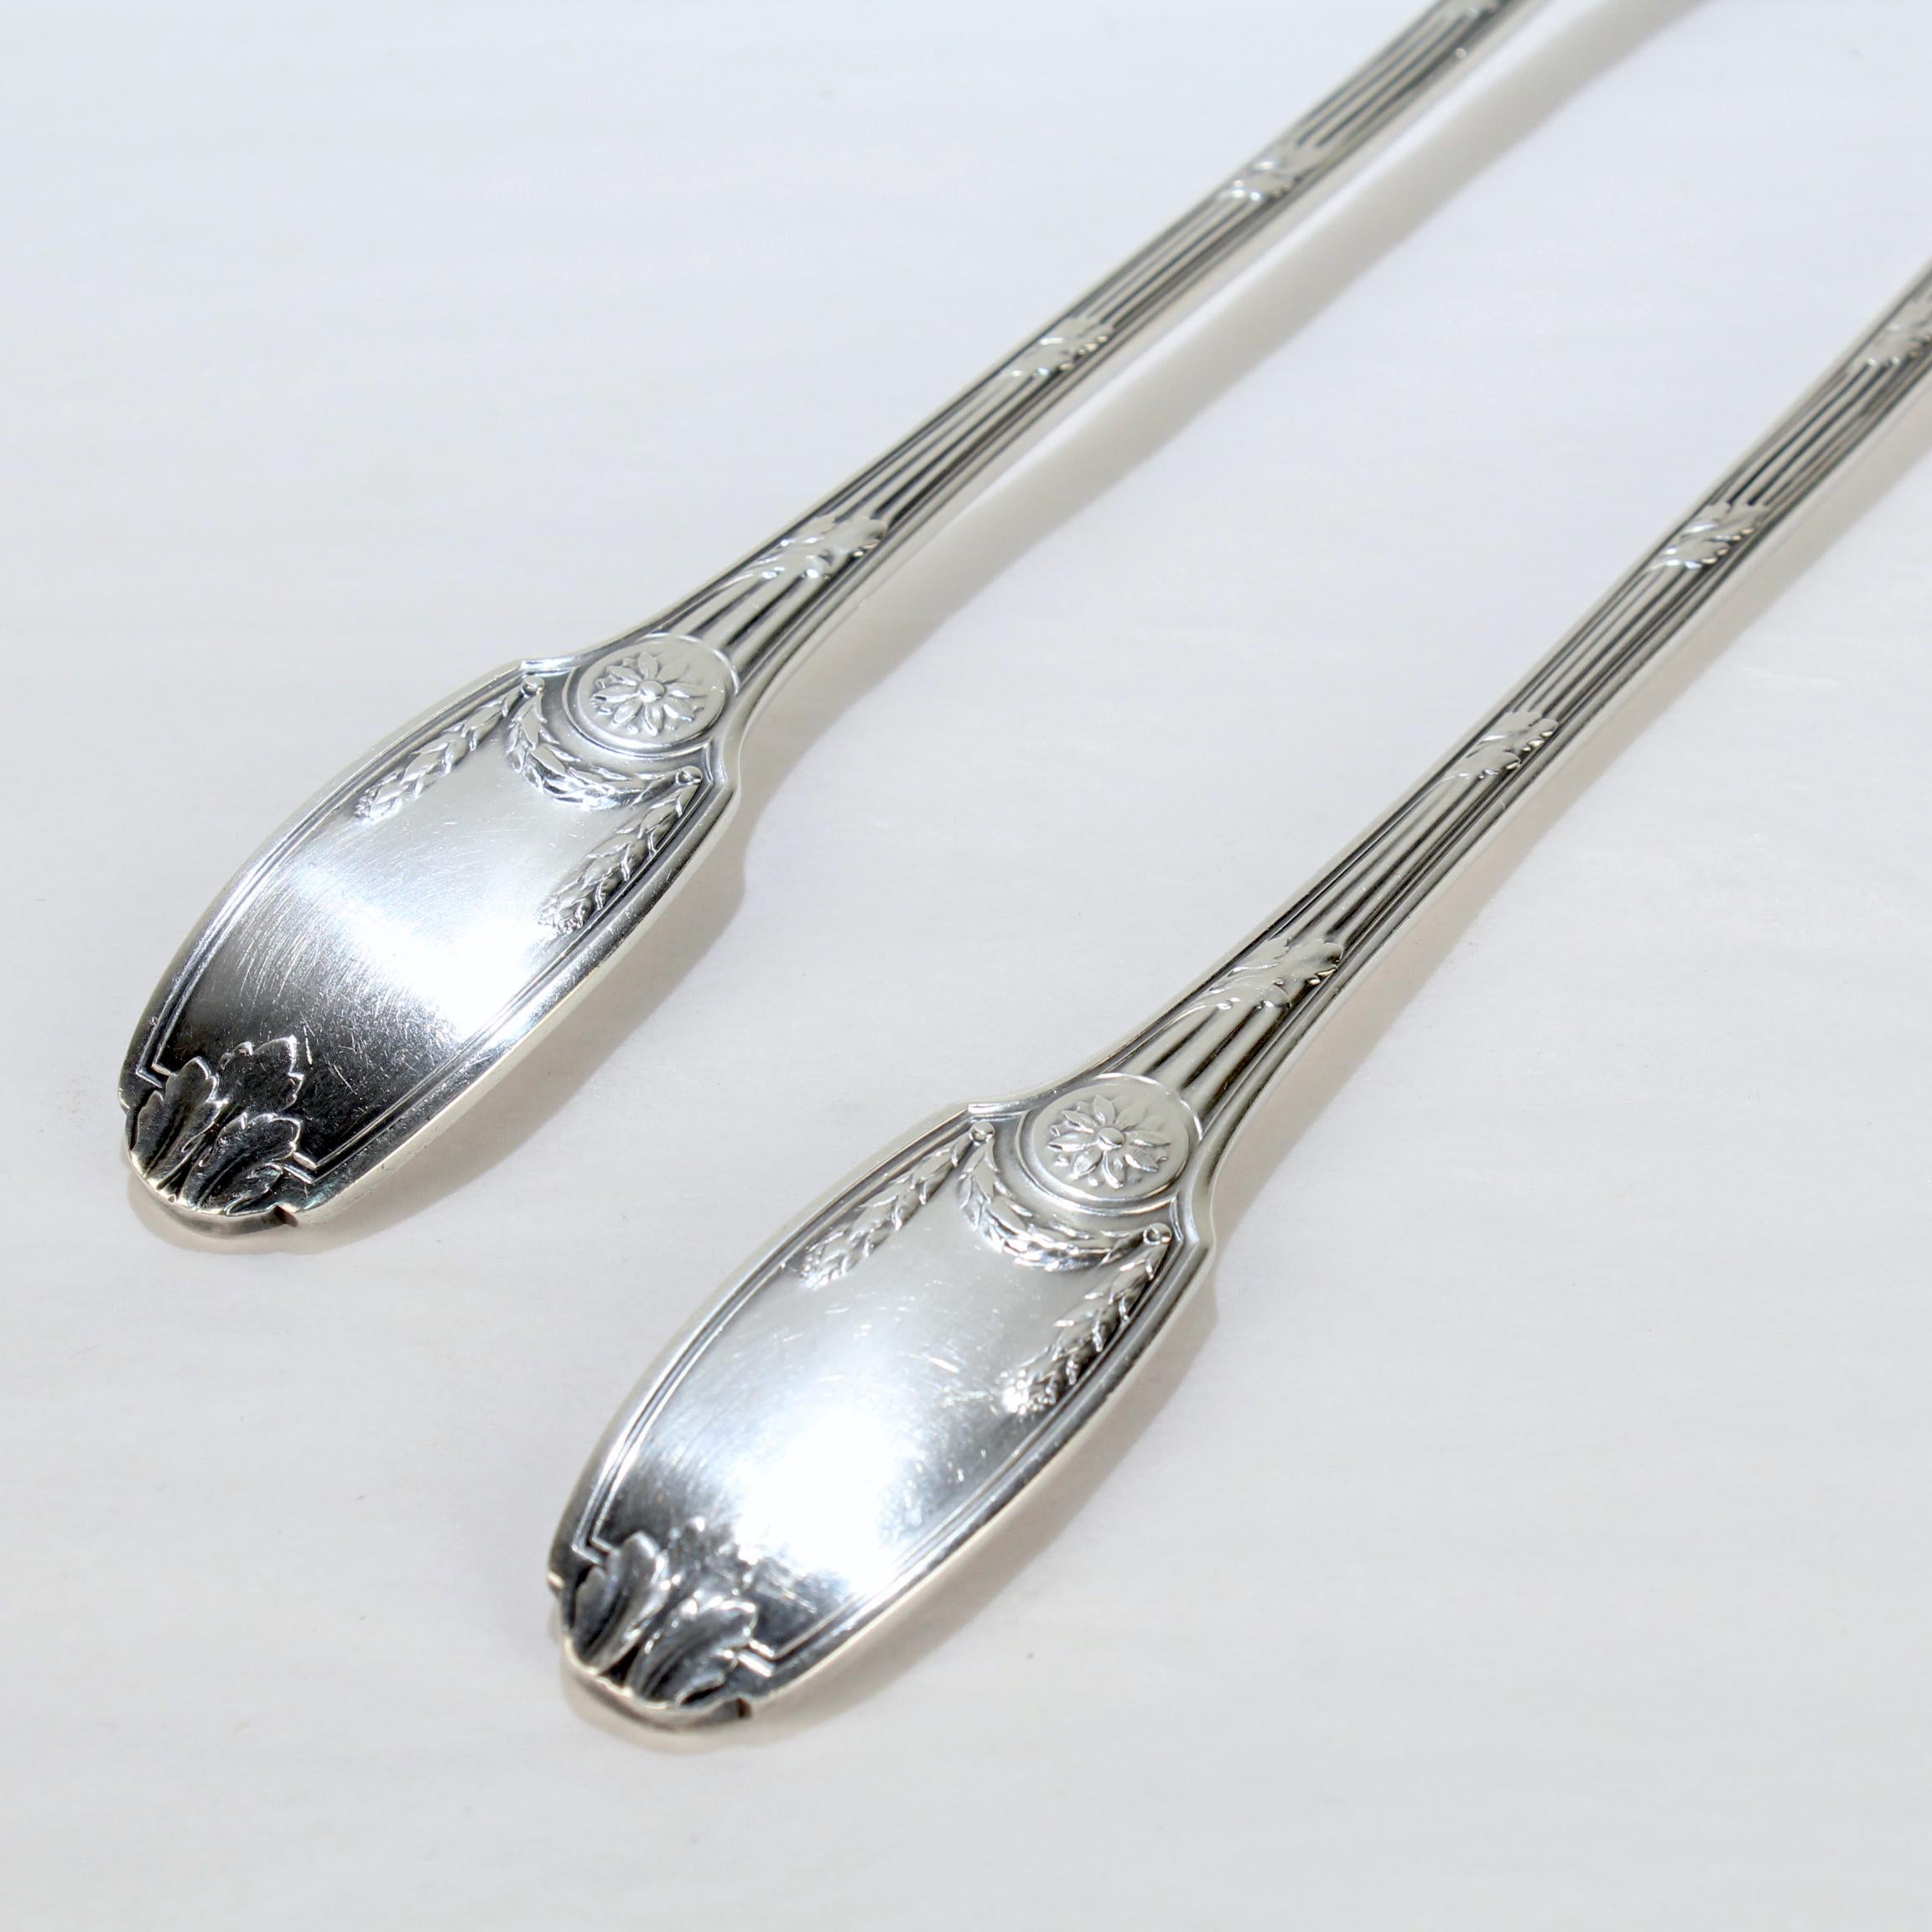 Pair Christofle France Delafosse Silverplate Fork & Spoon Salad Servers For Sale 2